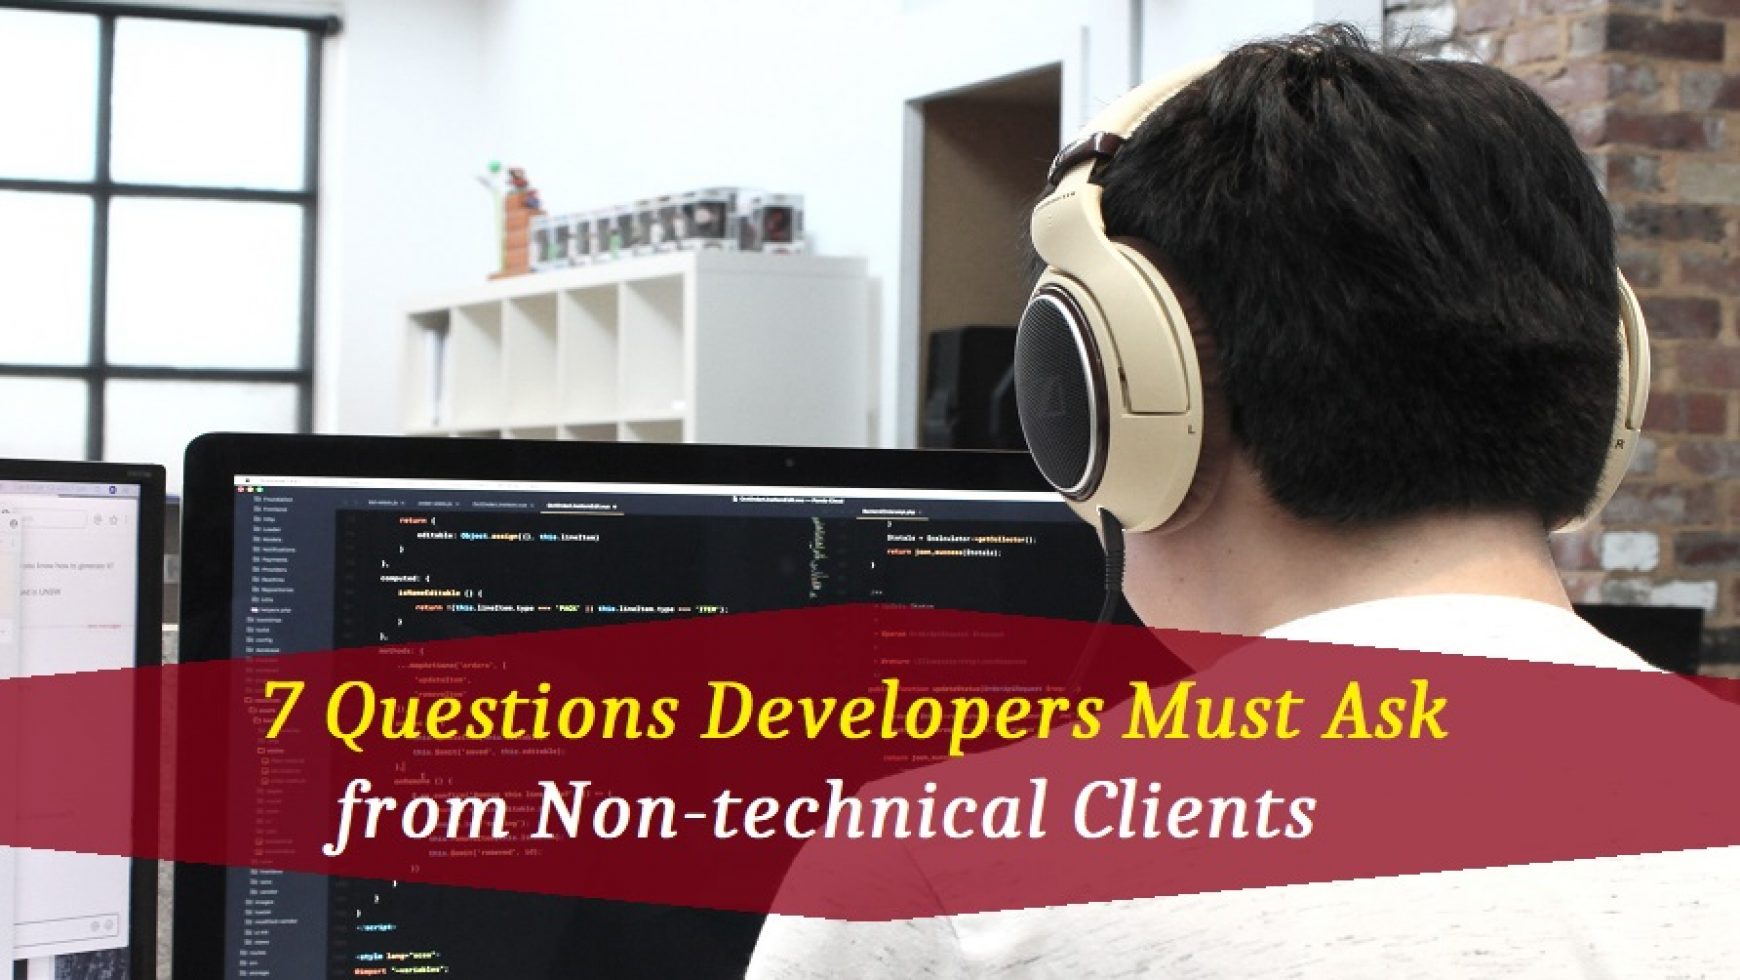 7 Questions Developers Must Ask from Non-technical Clients